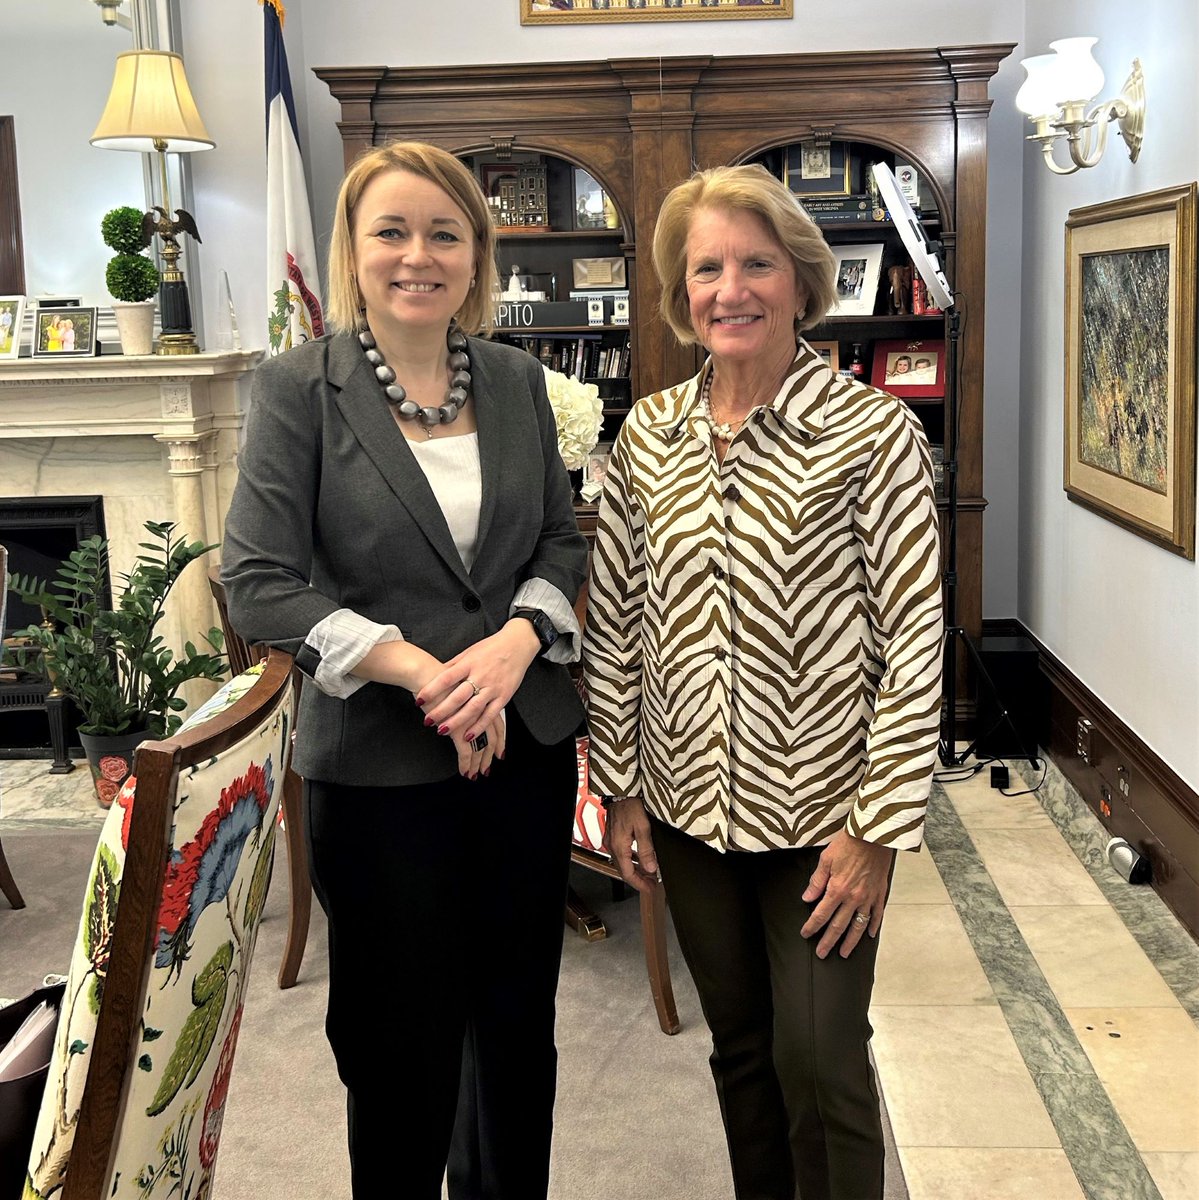 Great chat with @SenCapito from #WestVirginia today. Thank you for supporting continued aid to #Ukraine and the transatlantic alliance overall. Also discussed our strong #trade relationship: The EU invests $3.4B in the state, and WV exports to the EU $980M in goods.